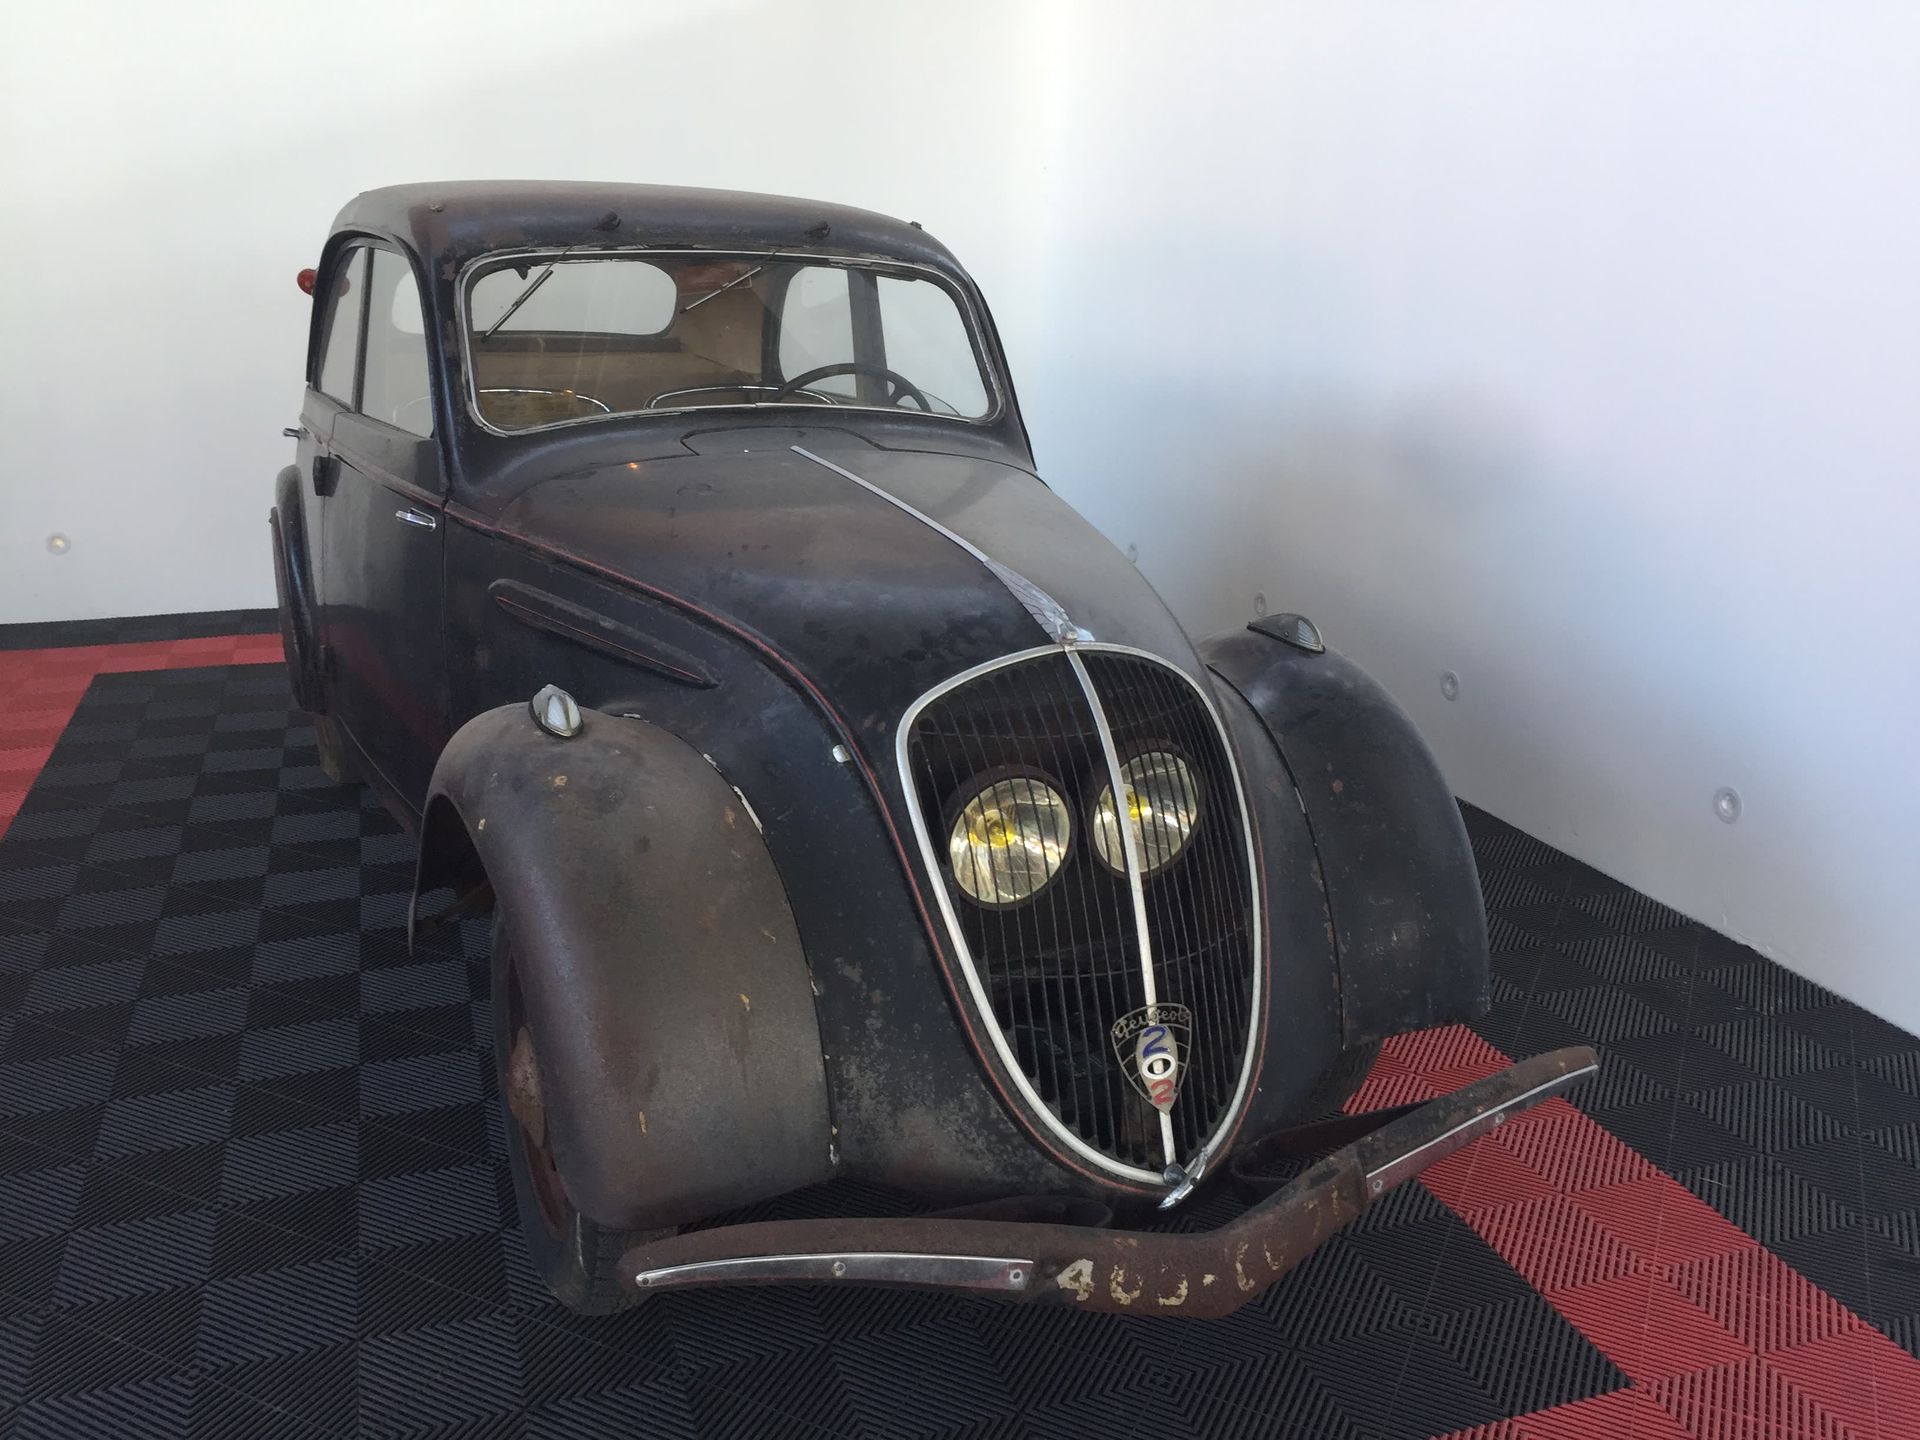 1938 Peugeot 202 53153 km

French registration 

Serial number : 438231

The car&hellip;